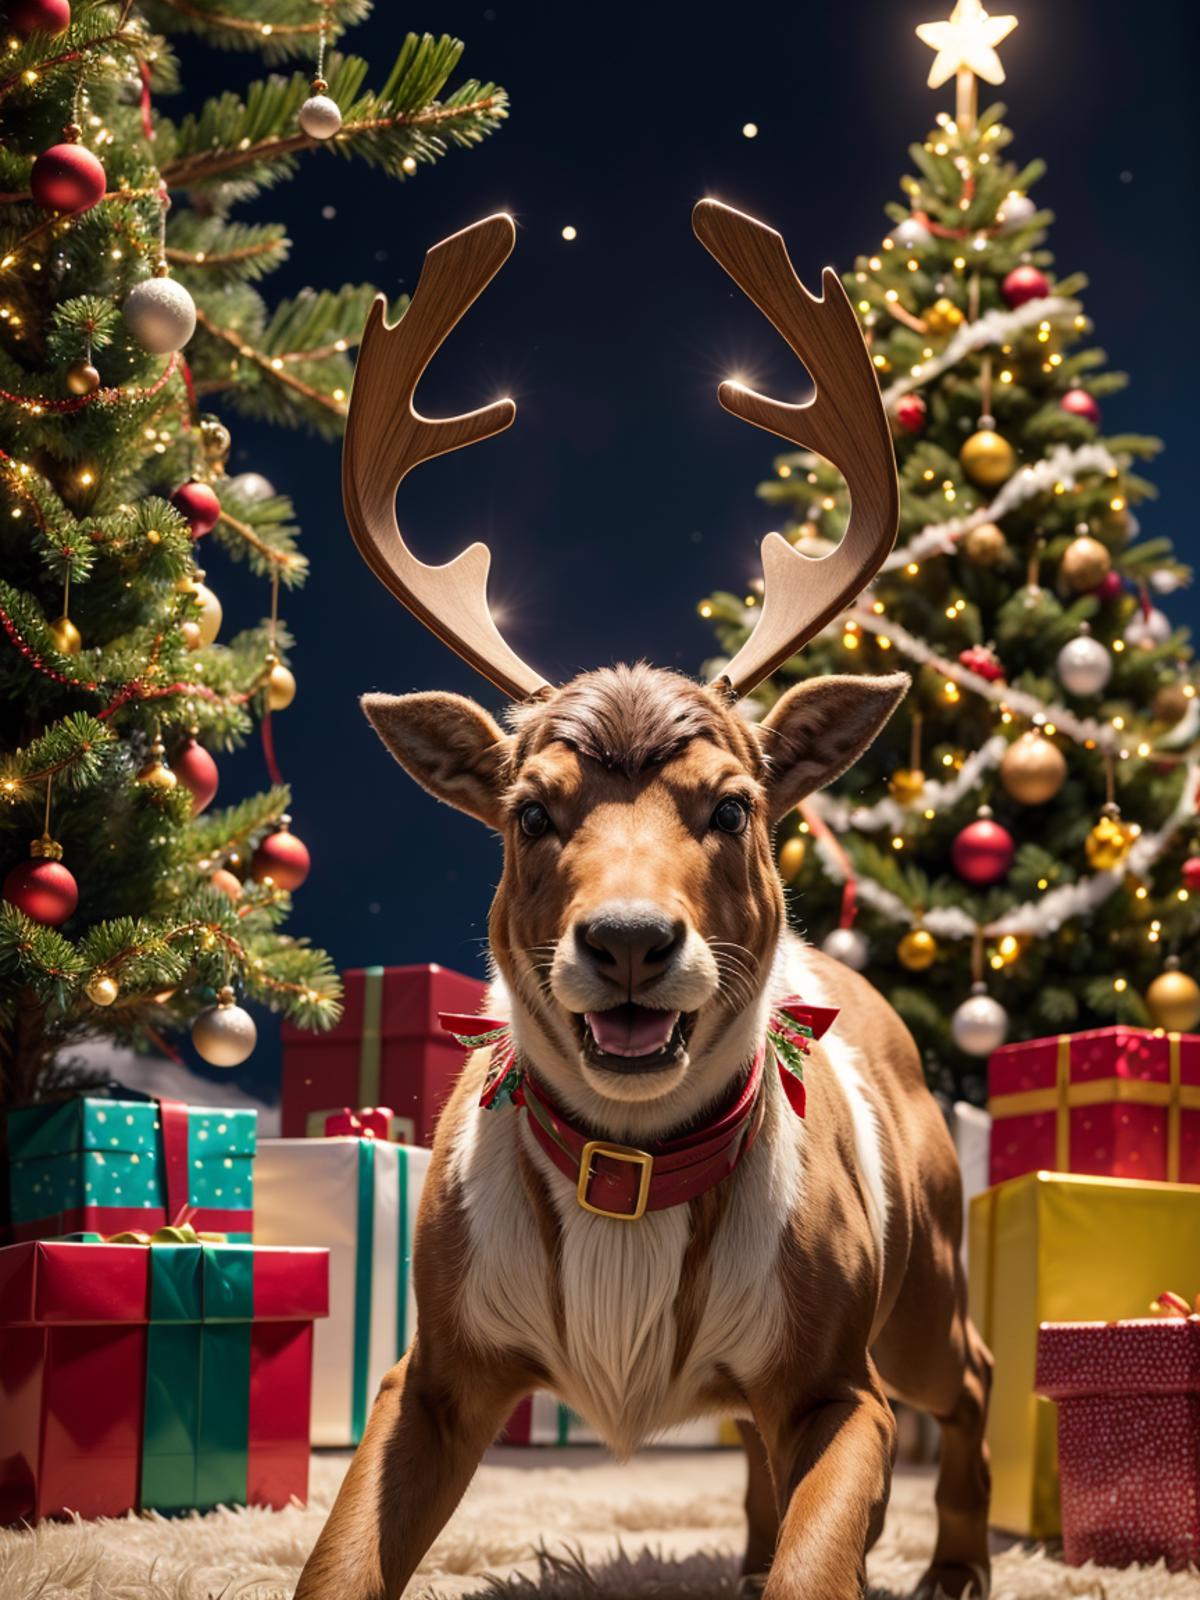 Christmas Dog with Reindeer Antlers and Bows on Presents.